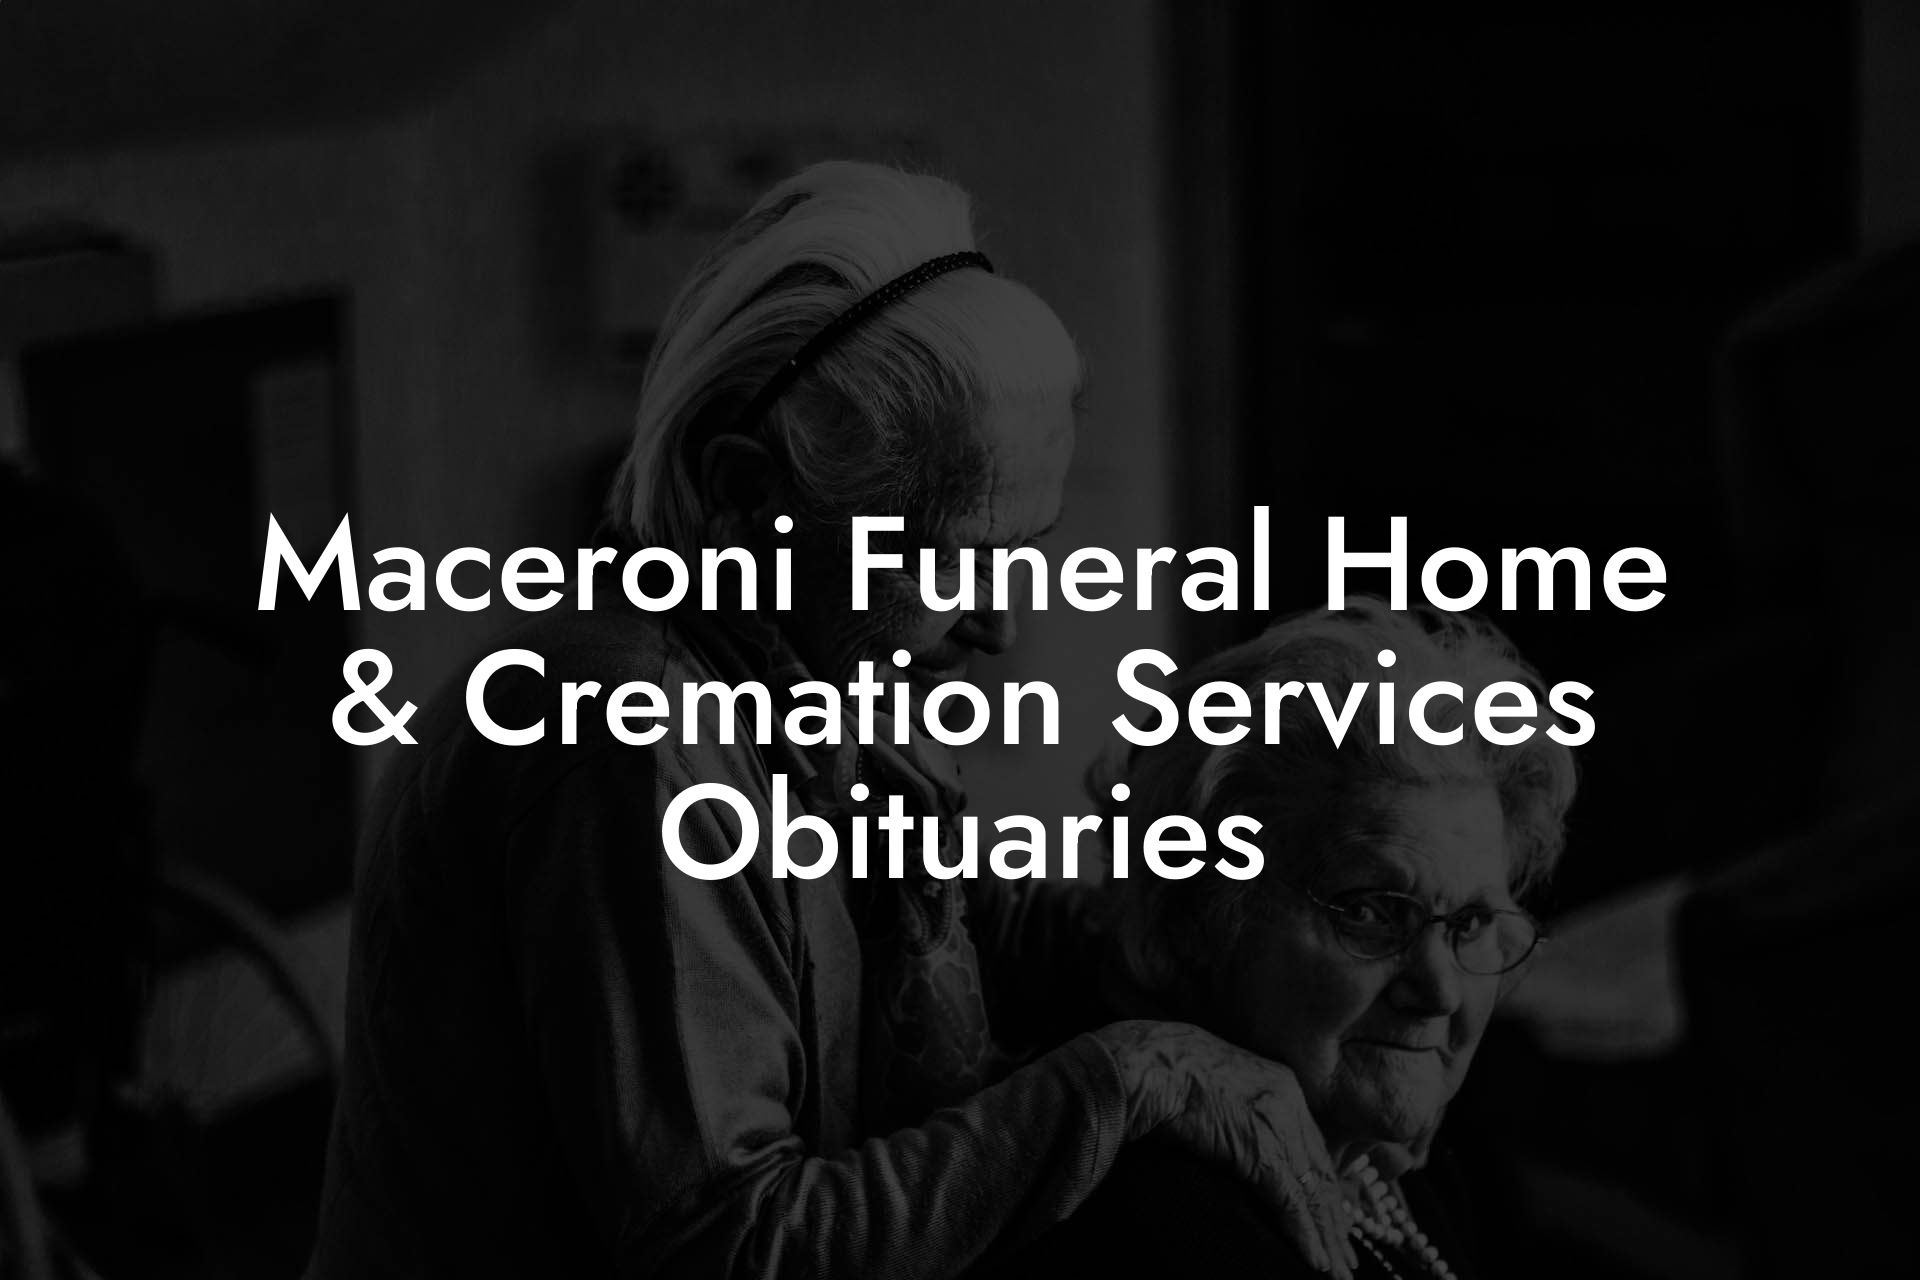 Maceroni Funeral Home & Cremation Services Obituaries